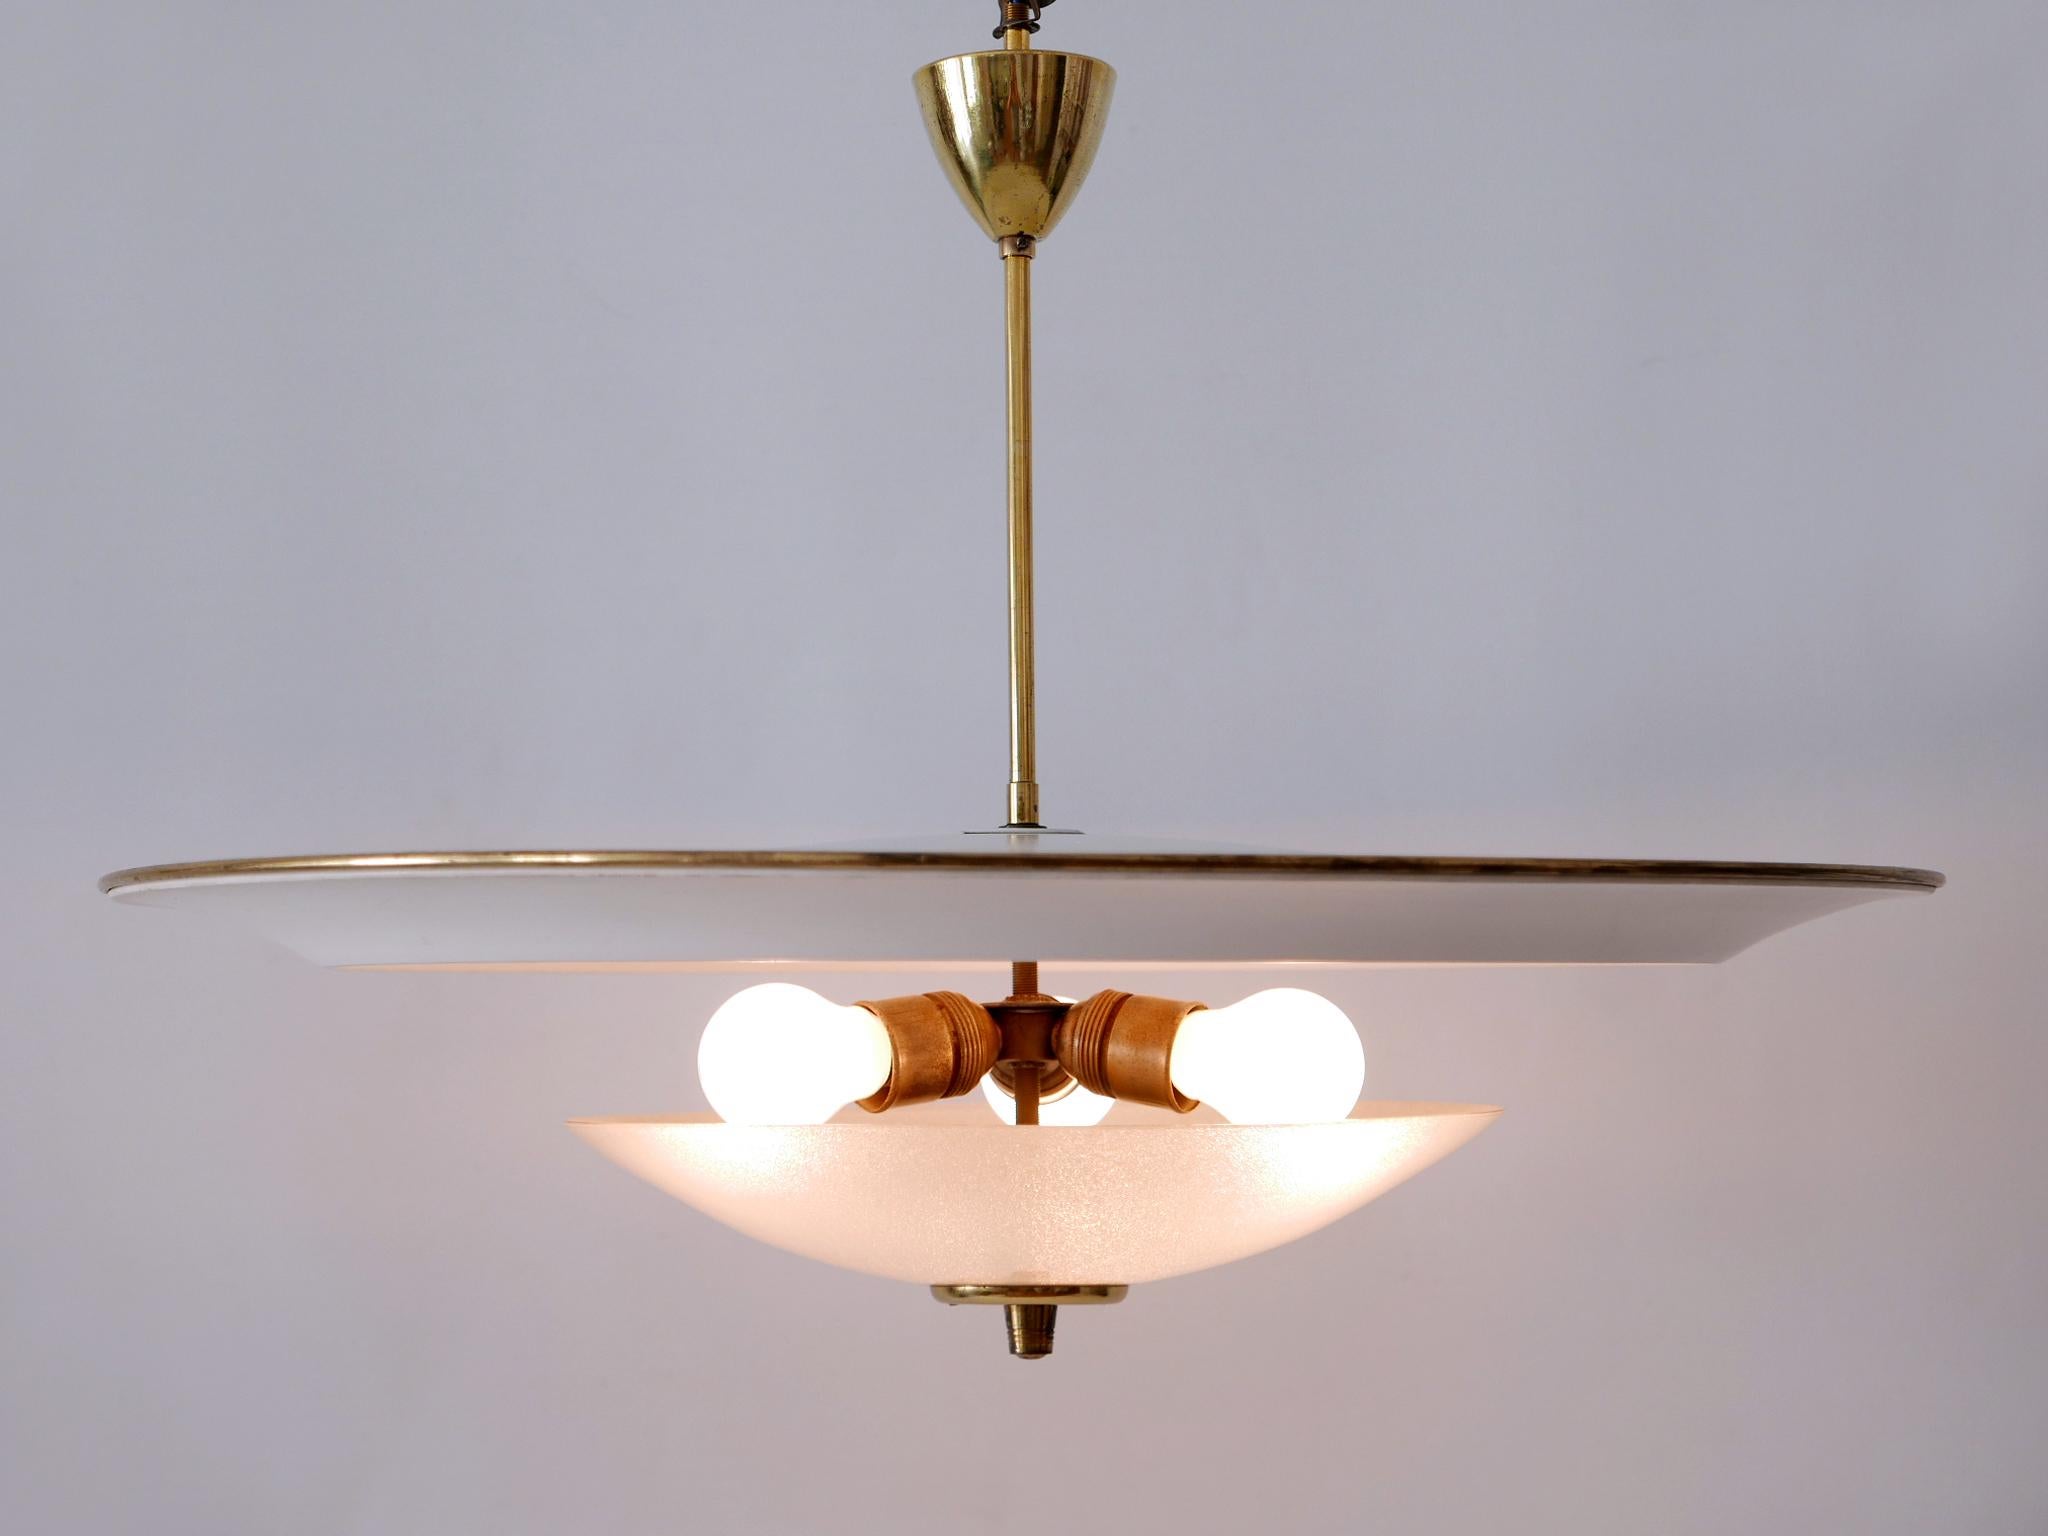 Large Mid-Century Modern 'Ufo' Ceiling Light or Pendant Lamp Germany 1950s № 1 For Sale 2